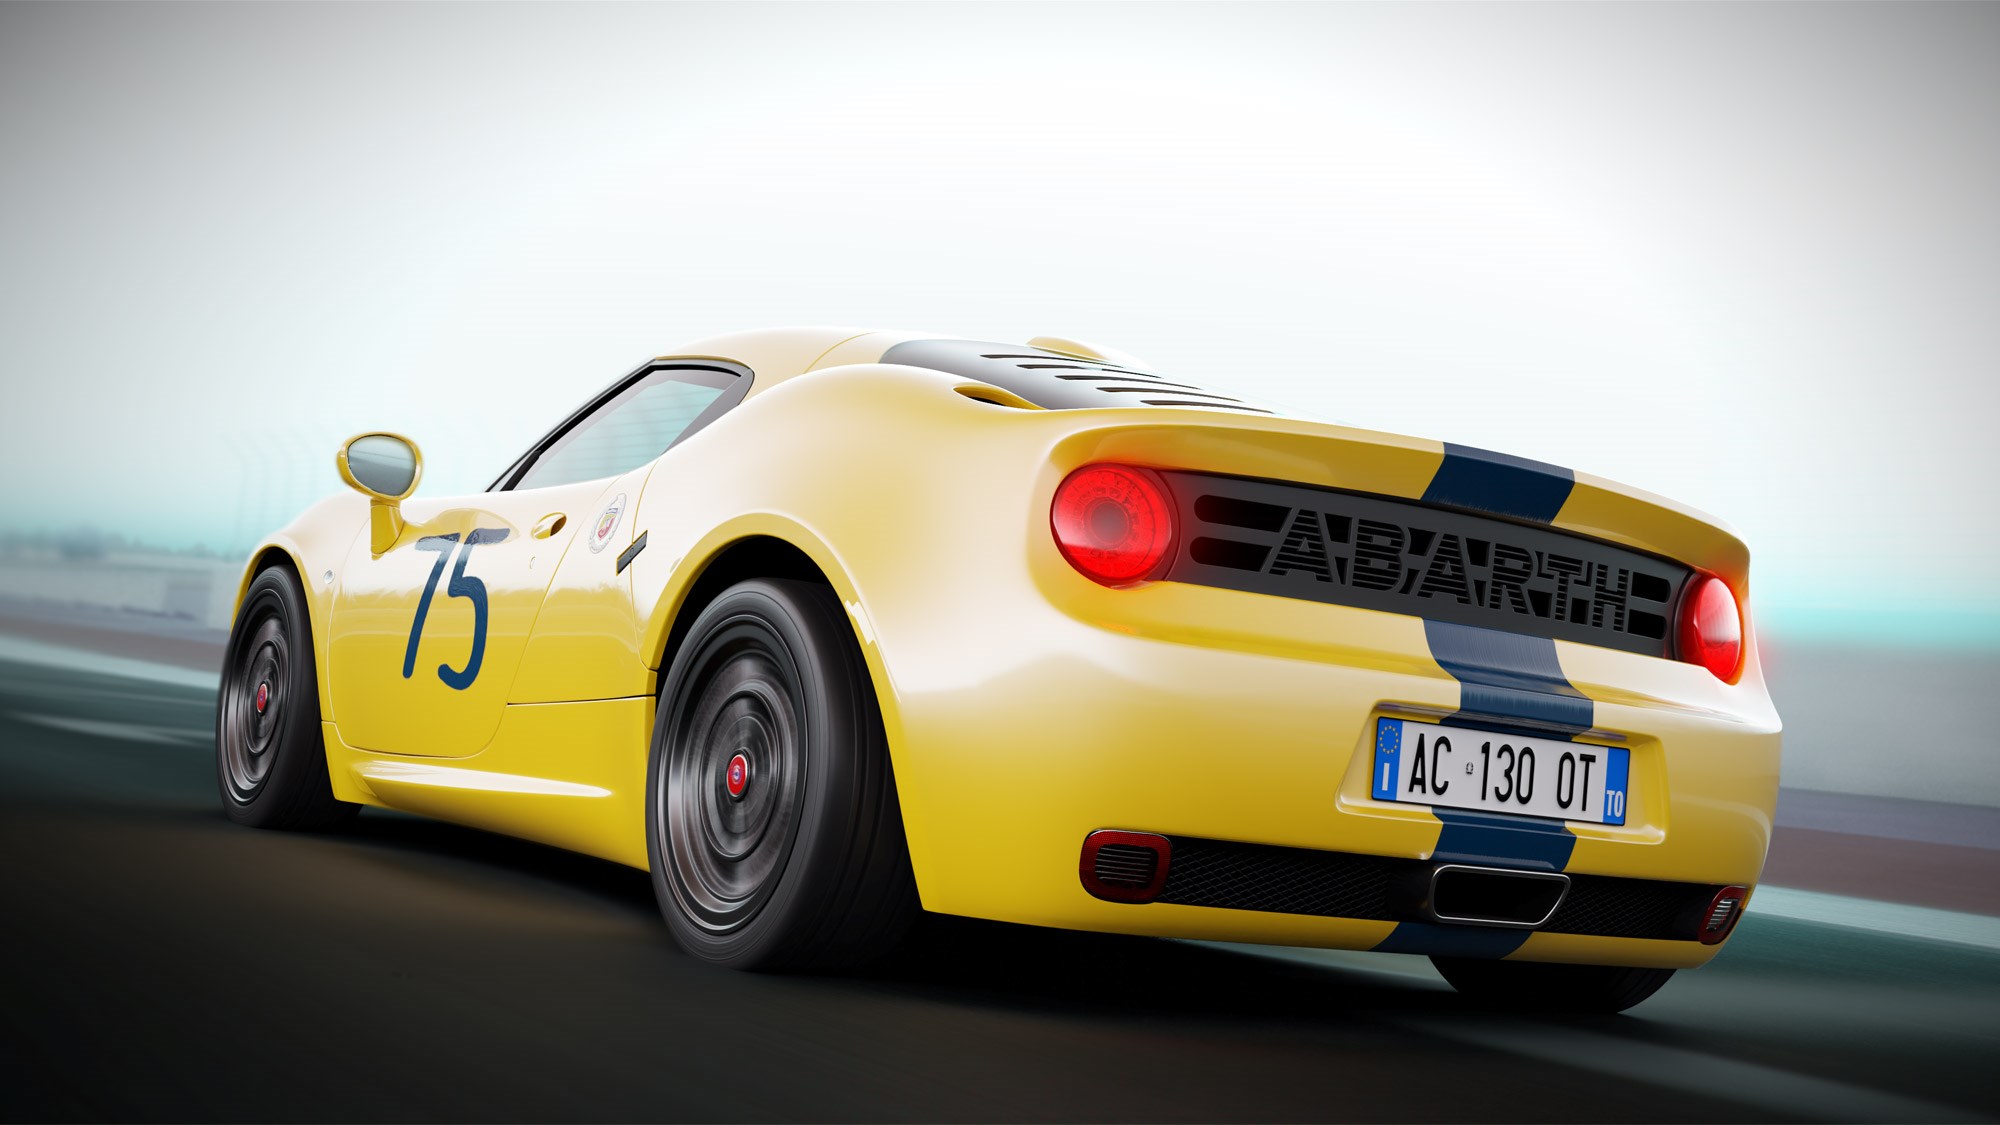 Abarth Classiche 1300 OT: the Alfa Romeo 4C lives! But fortunately not for long…